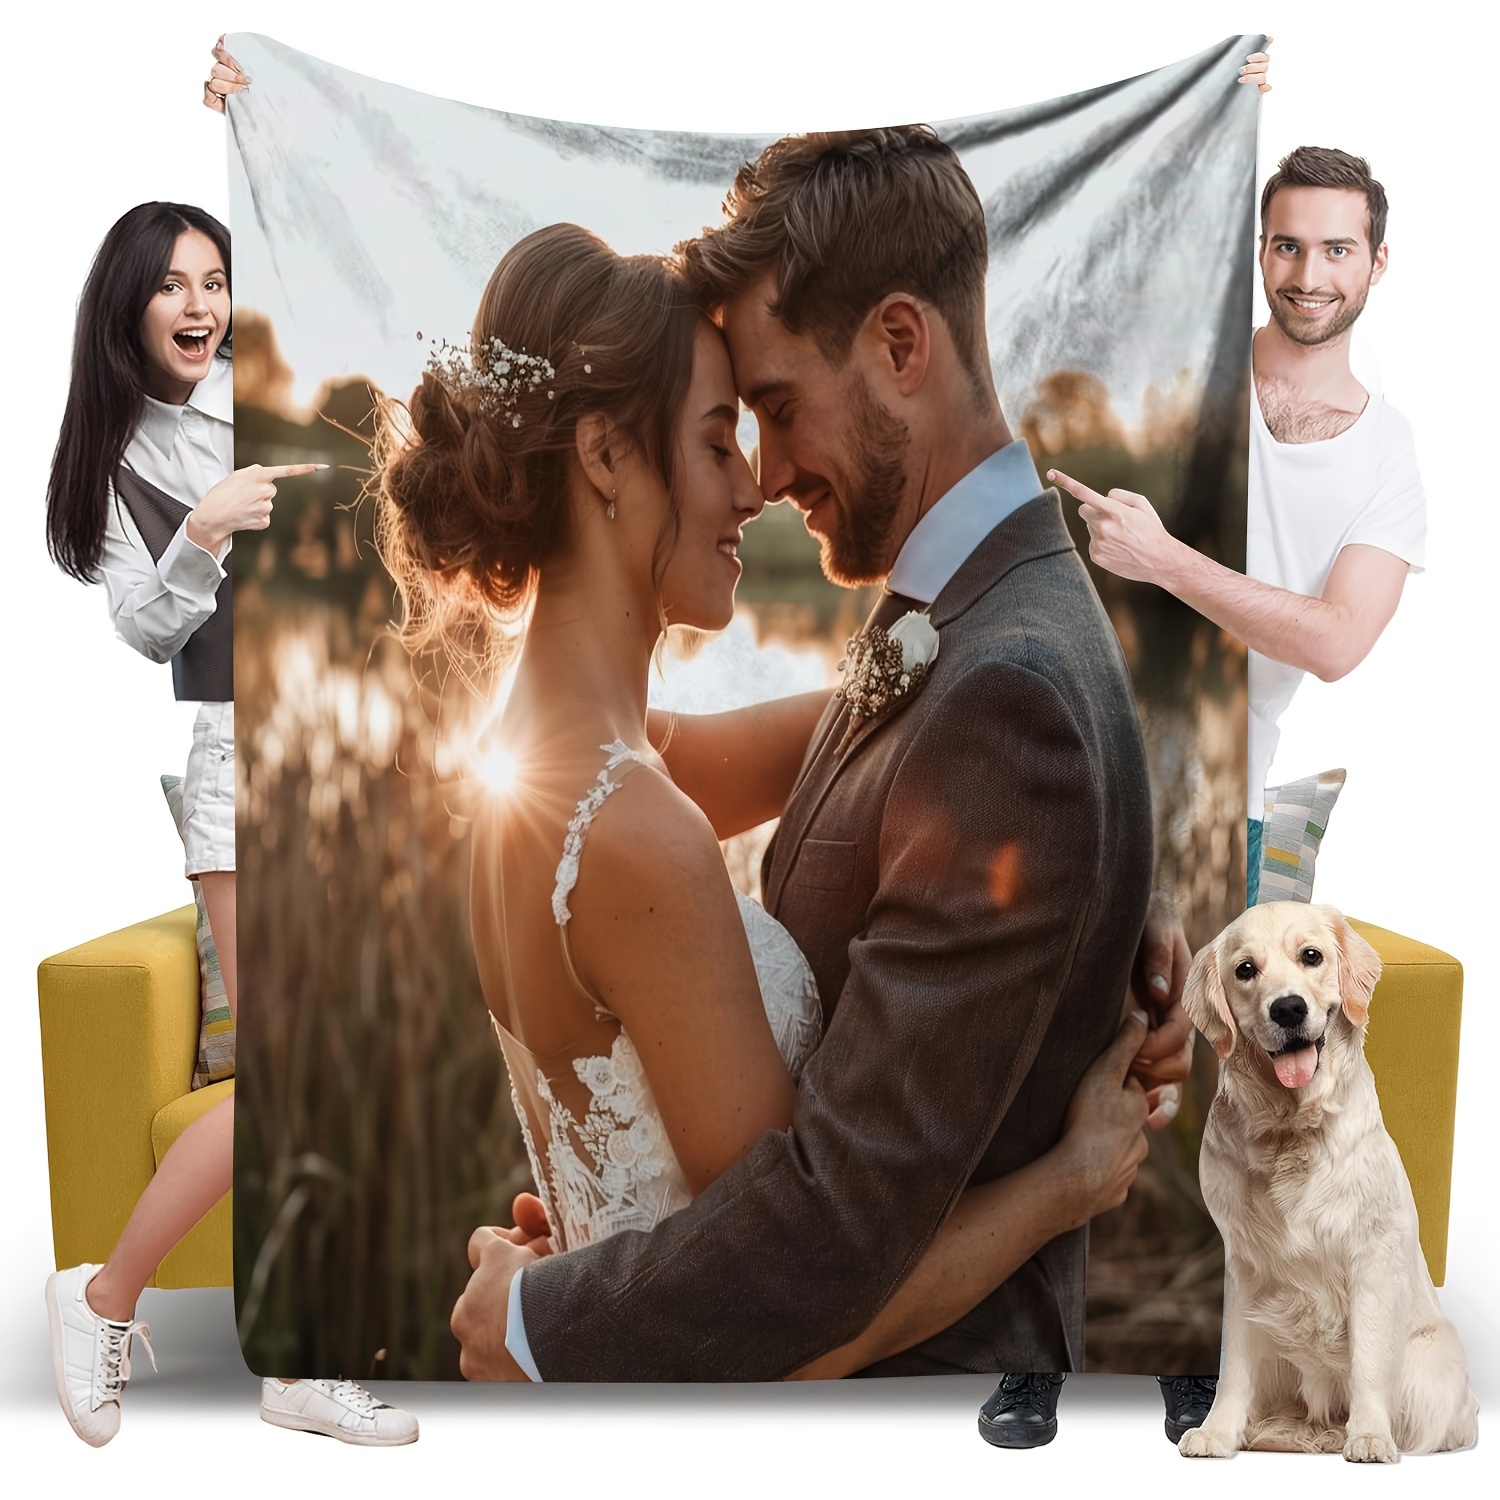 

1pc Picture Custom Flannel Blanket With Photos, Soft And Warm Memorable Moments Commemorative Blanket, Wedding Birthday Gift For For Her, Him, Women And Lovers, Used For Nap, Camping, Travel, And Car